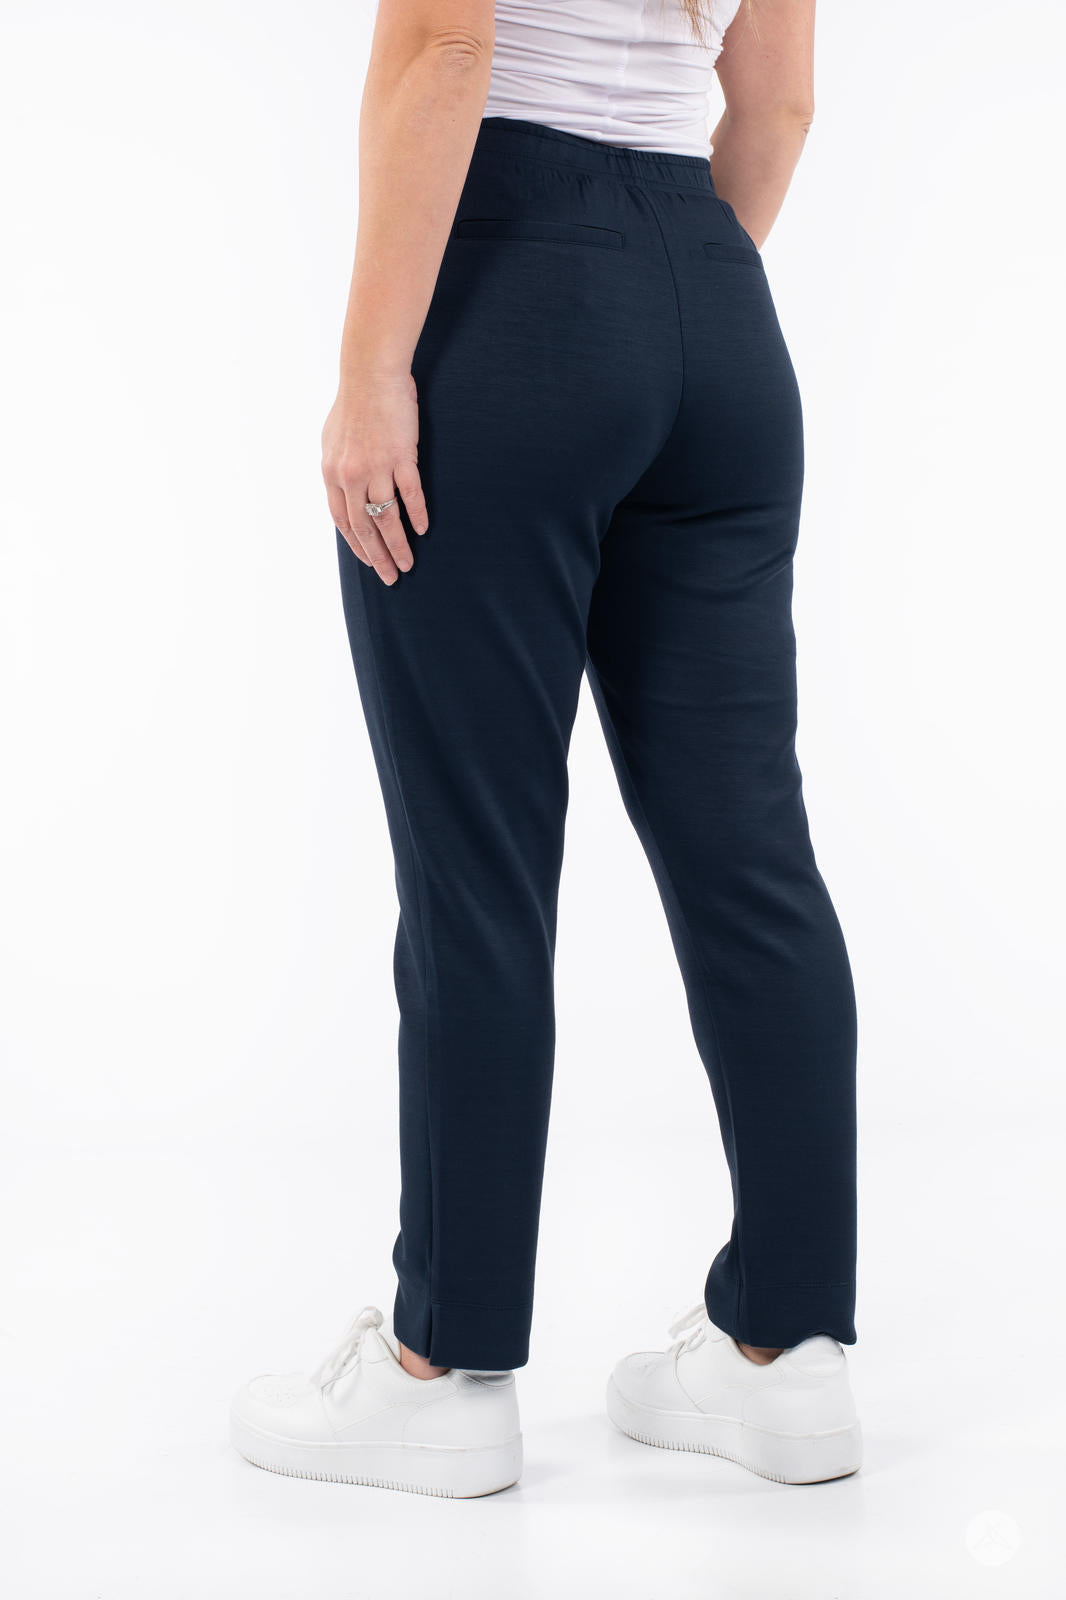 Women's Perfectly Cozy Jogger Pants - Stars Above™